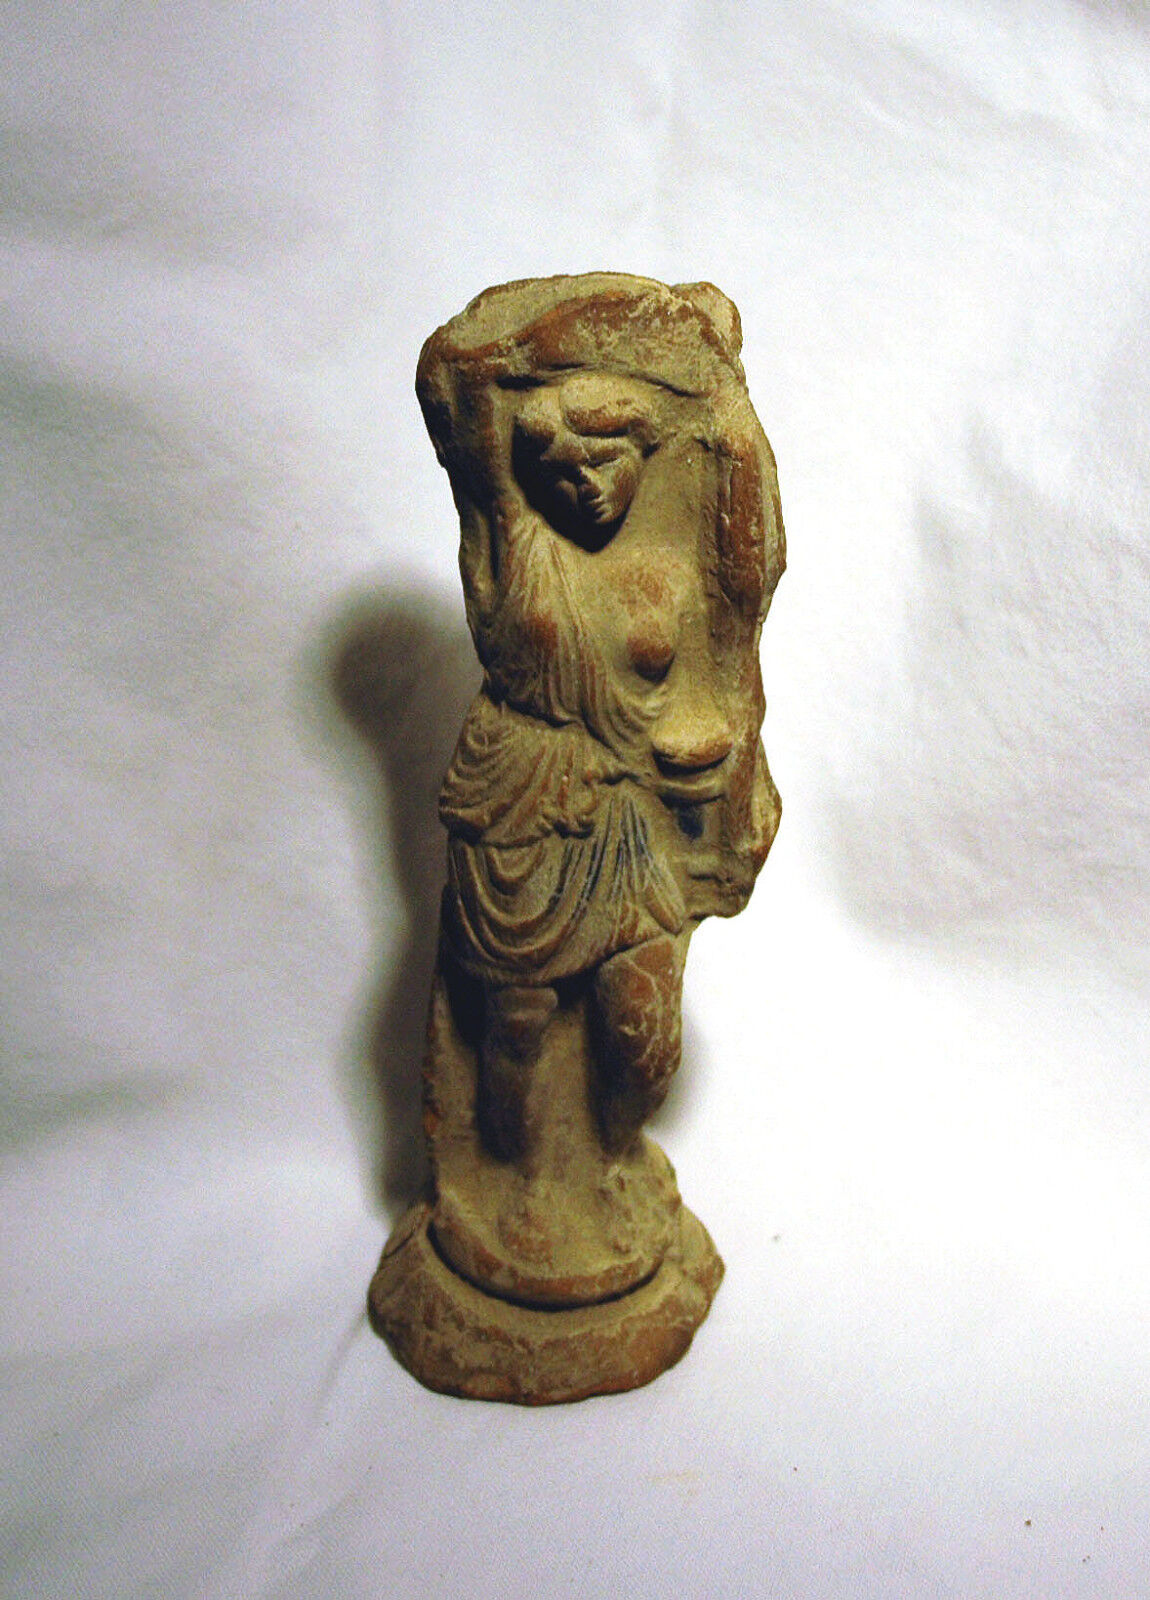 Antique statuette of a wounded Amazon